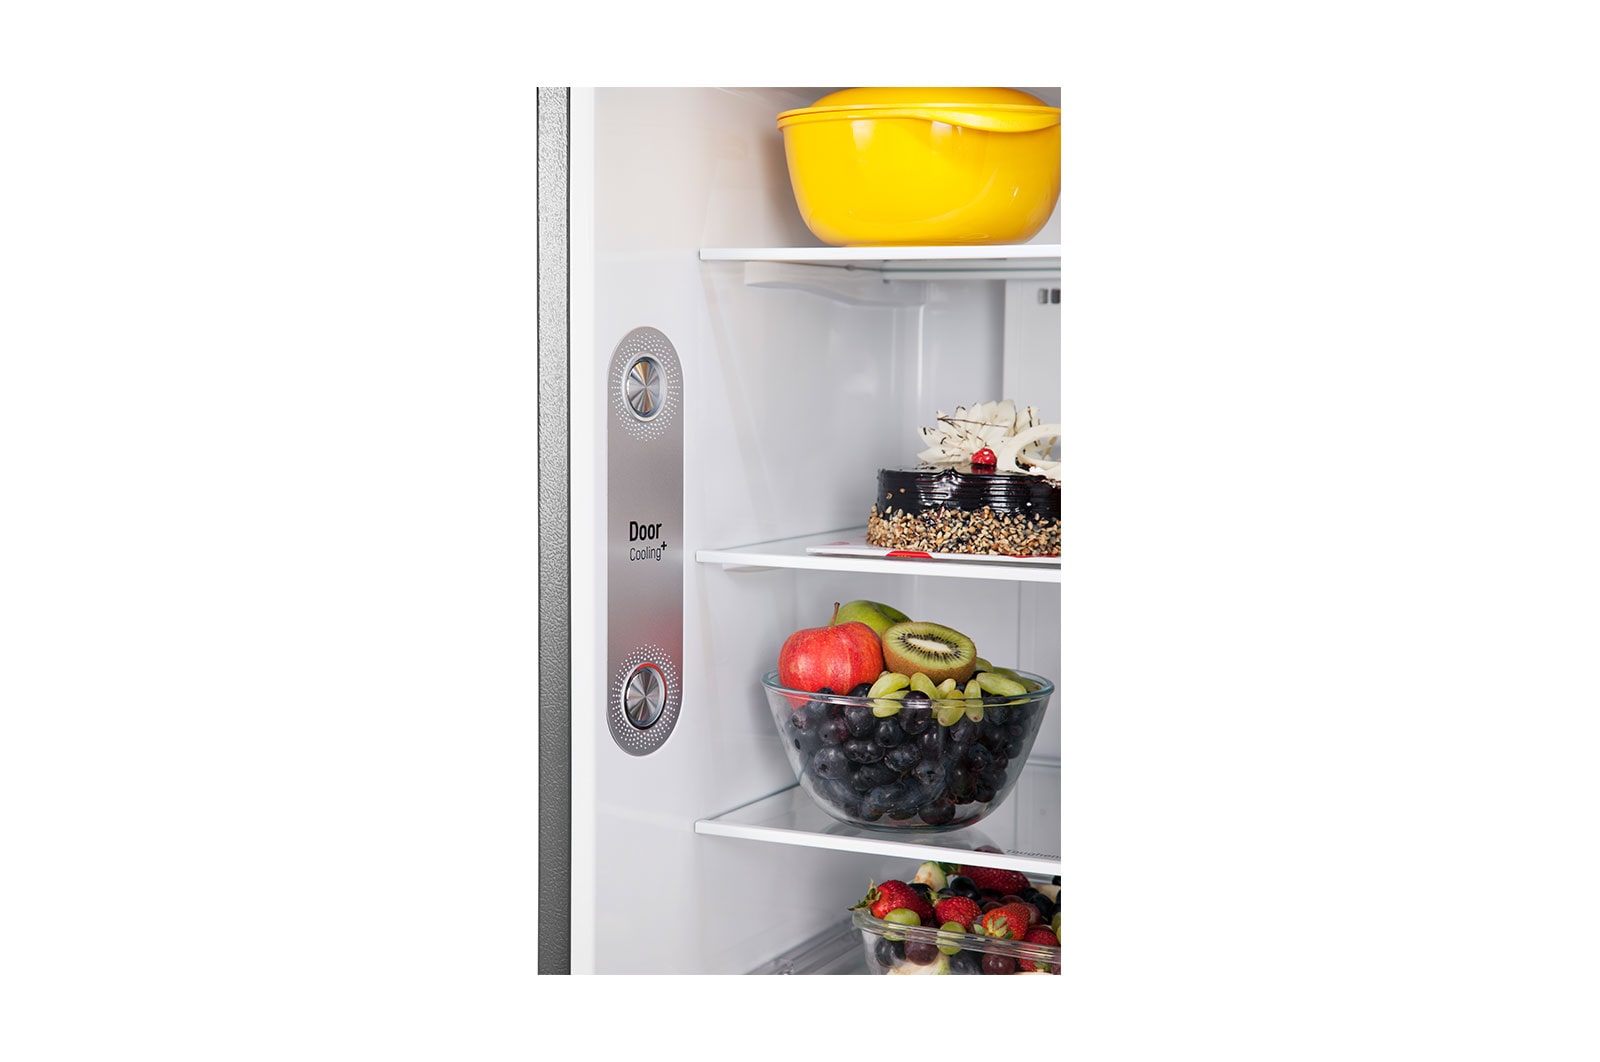 LG 260 L Frost Free Double Door Refrigerator in Shiney Steel Color GL-T292RPZY